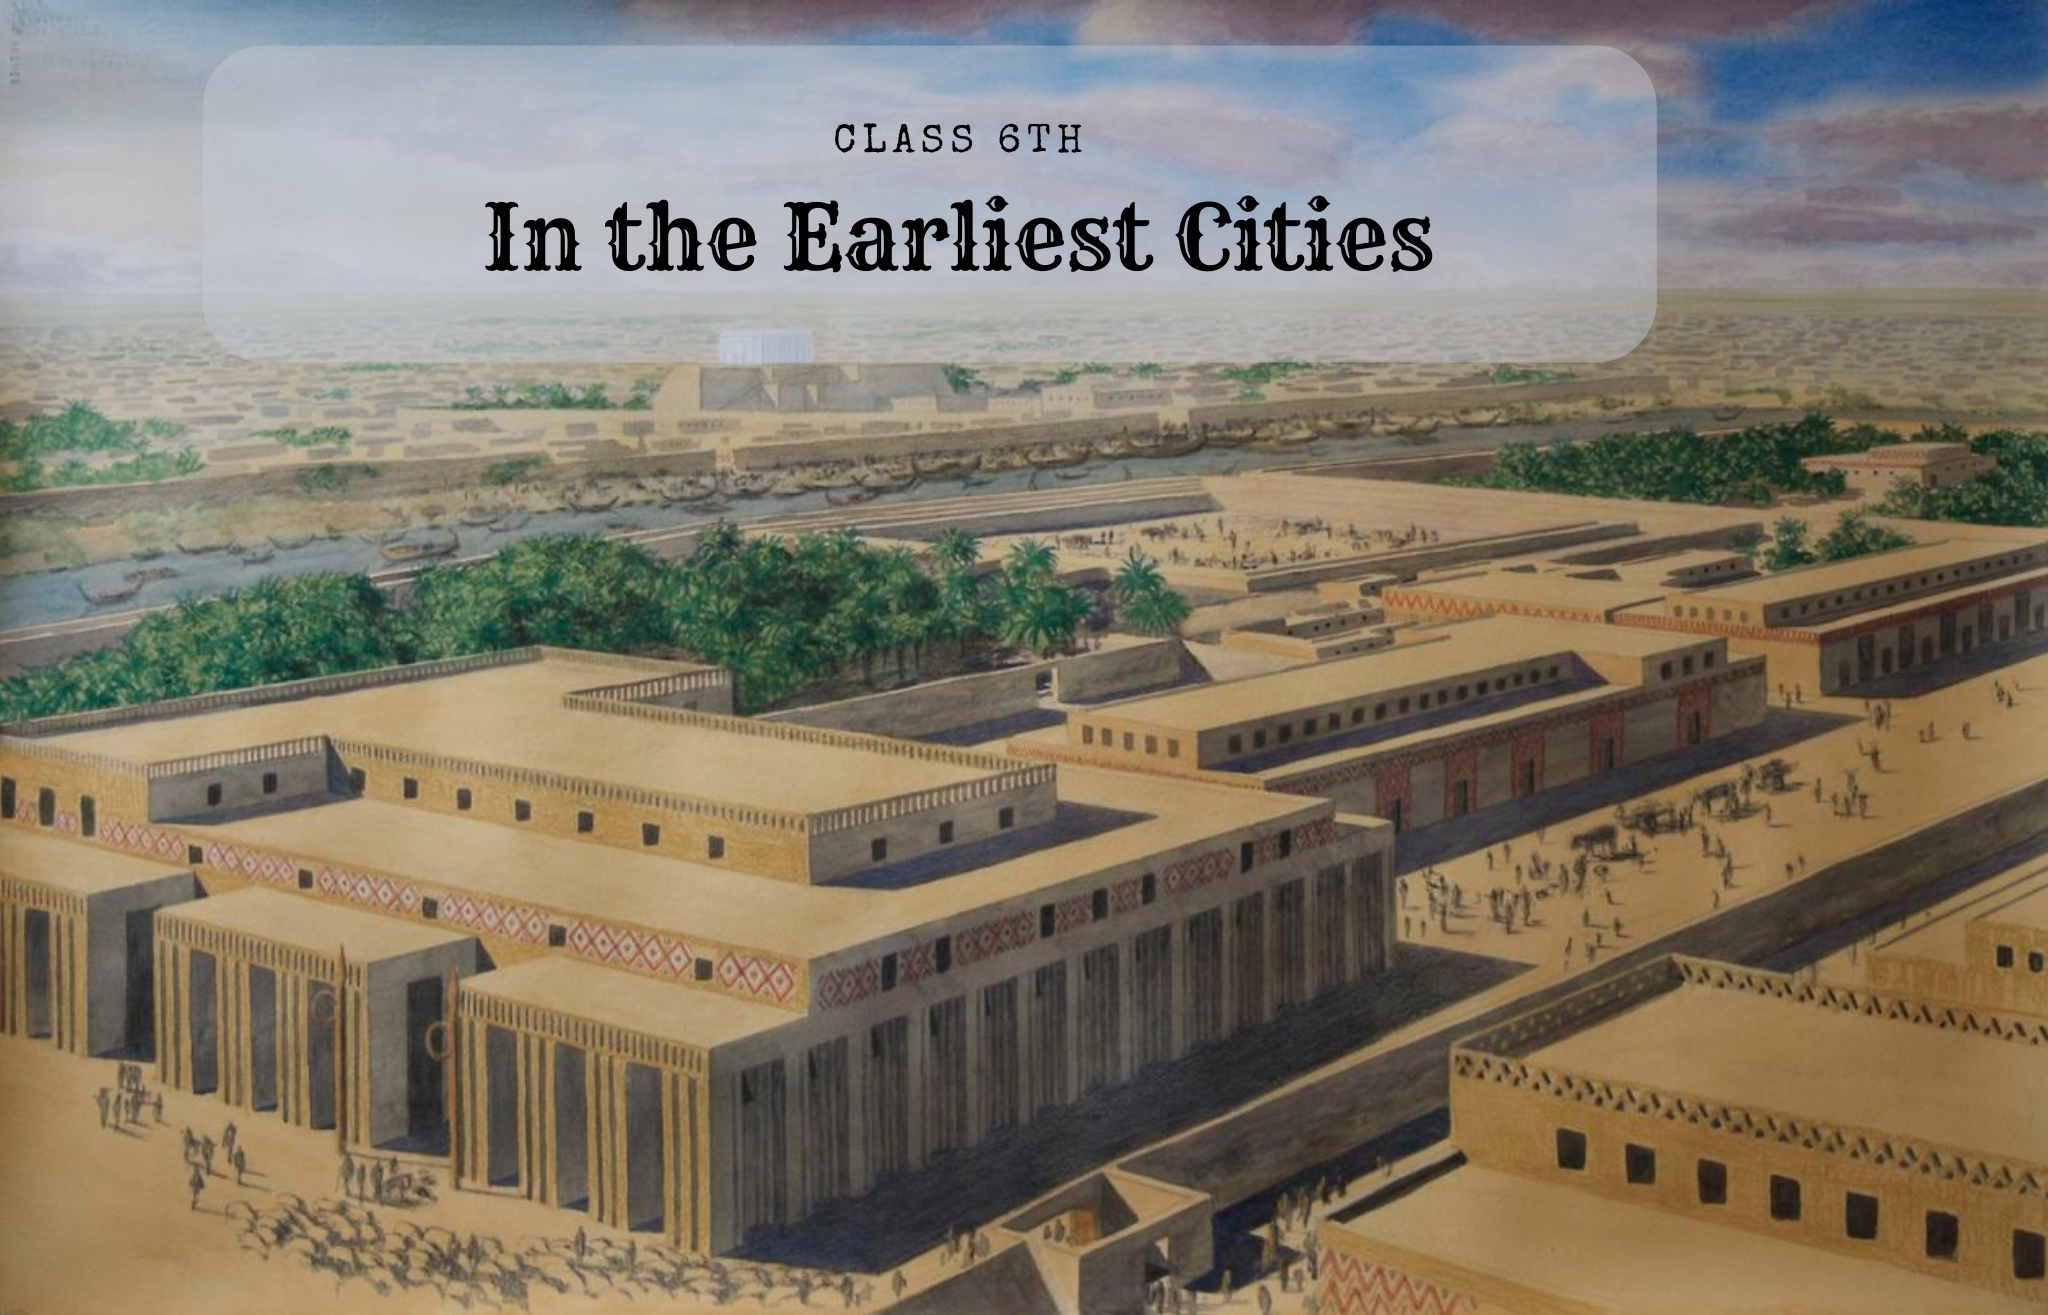 Solutions for Class 6 History Chapter 3 – “In the Earliest Cities”